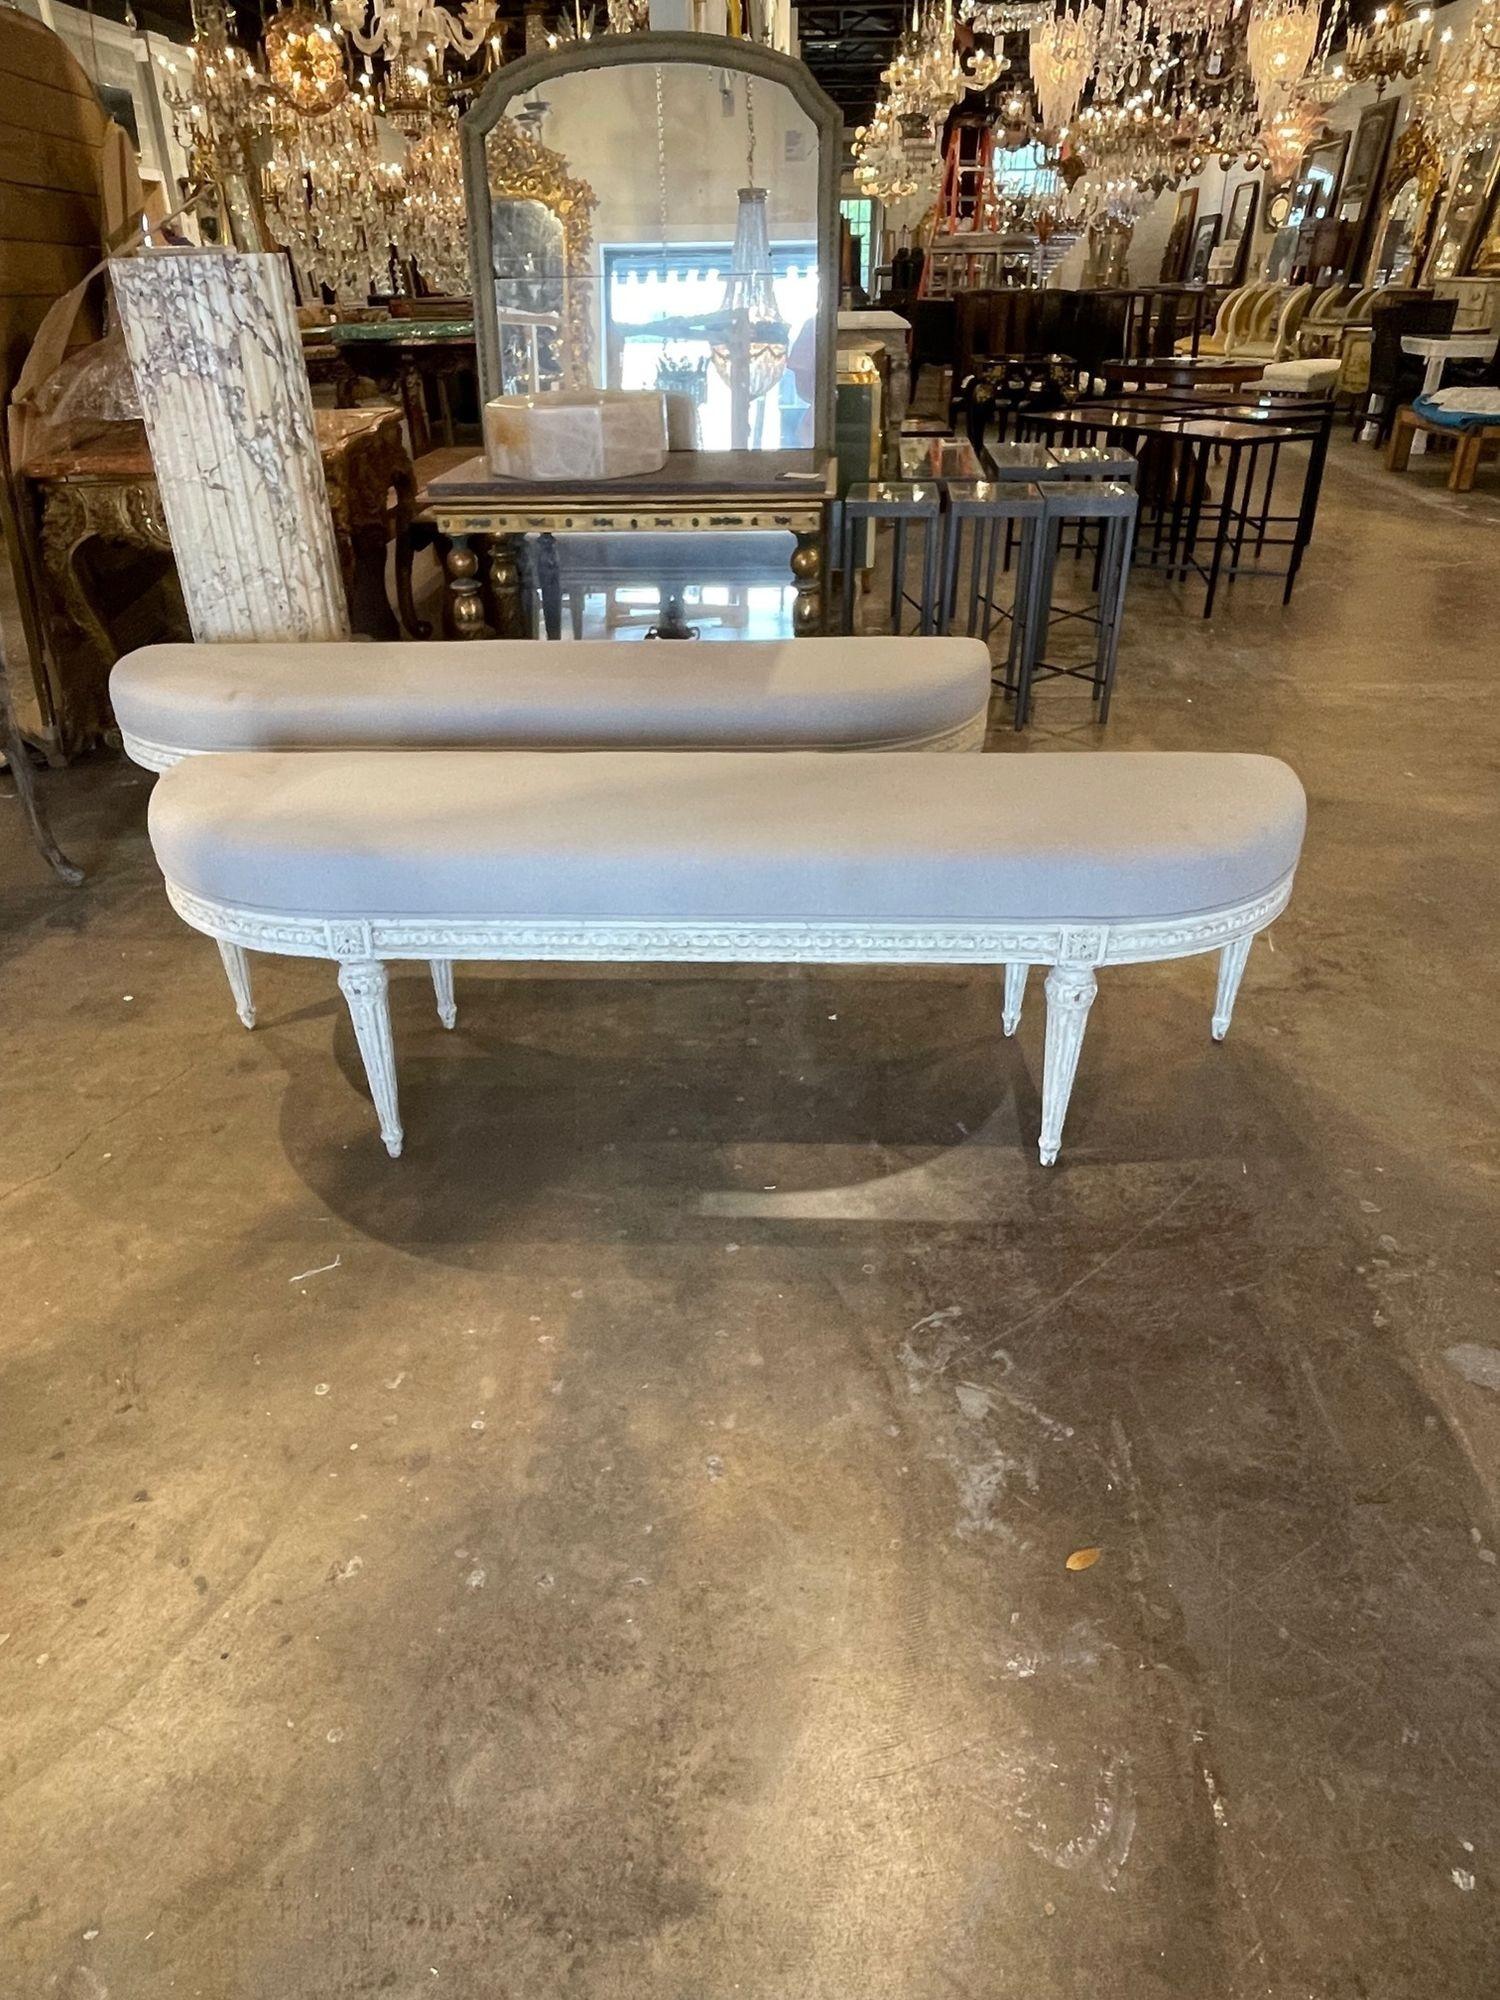 19th century French Louis XVI style carved and painted benches. Exceptional intricate carving and beautiful patina on these. Upholstered in a pretty beige linen fabric. Lovely! Note price listed is for 1